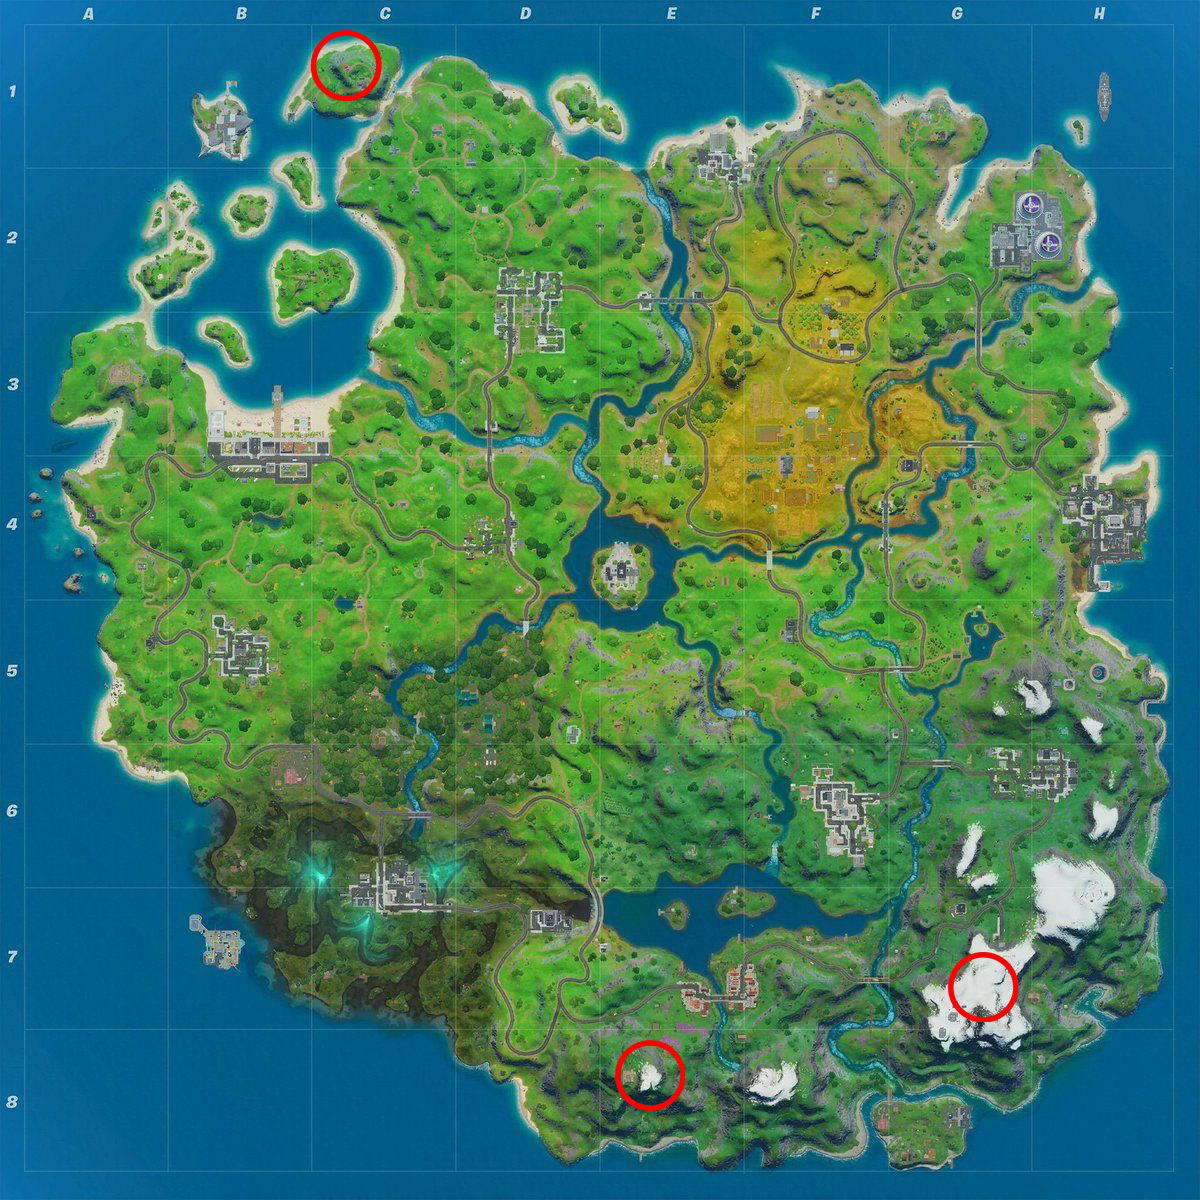 Lockie's Lighthouse, Apres Ski, and Mount Kay locations map